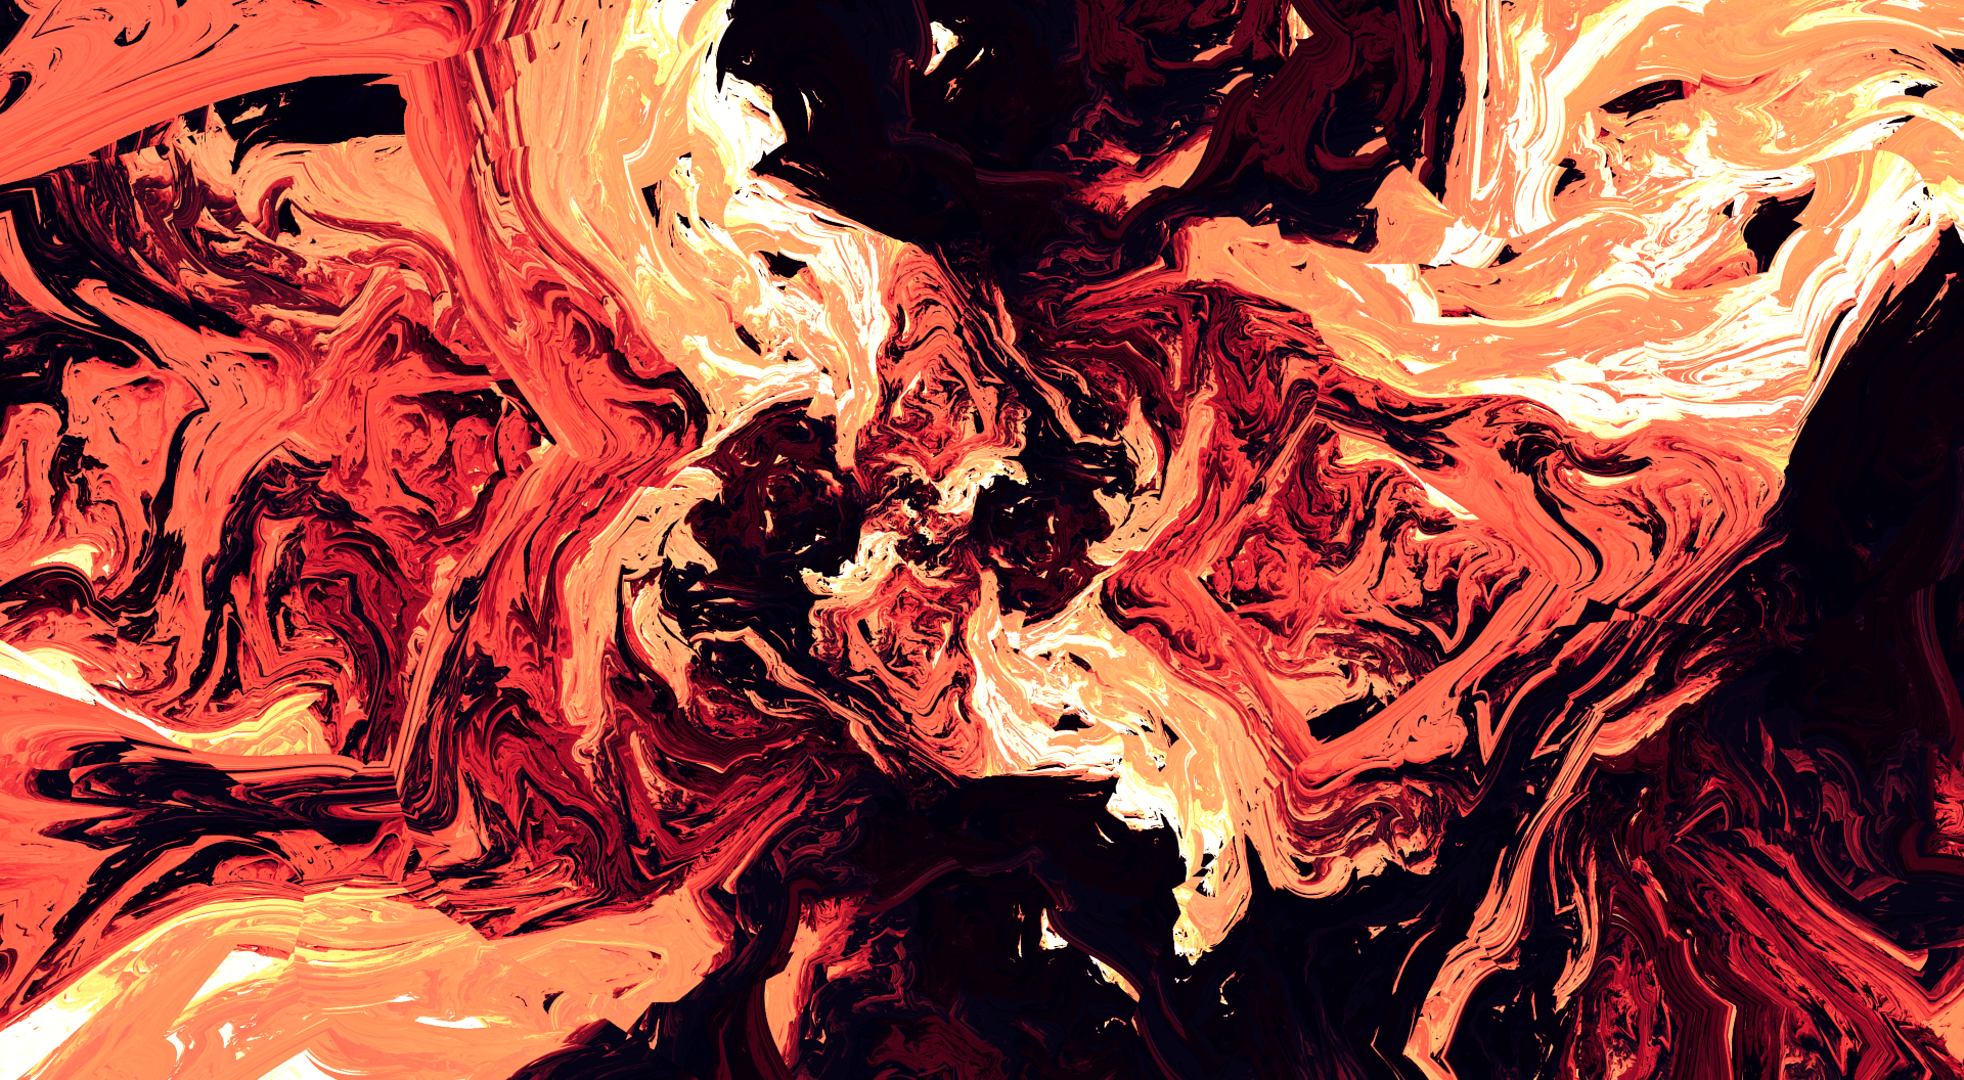 A close up of an abstract painting - Crimson